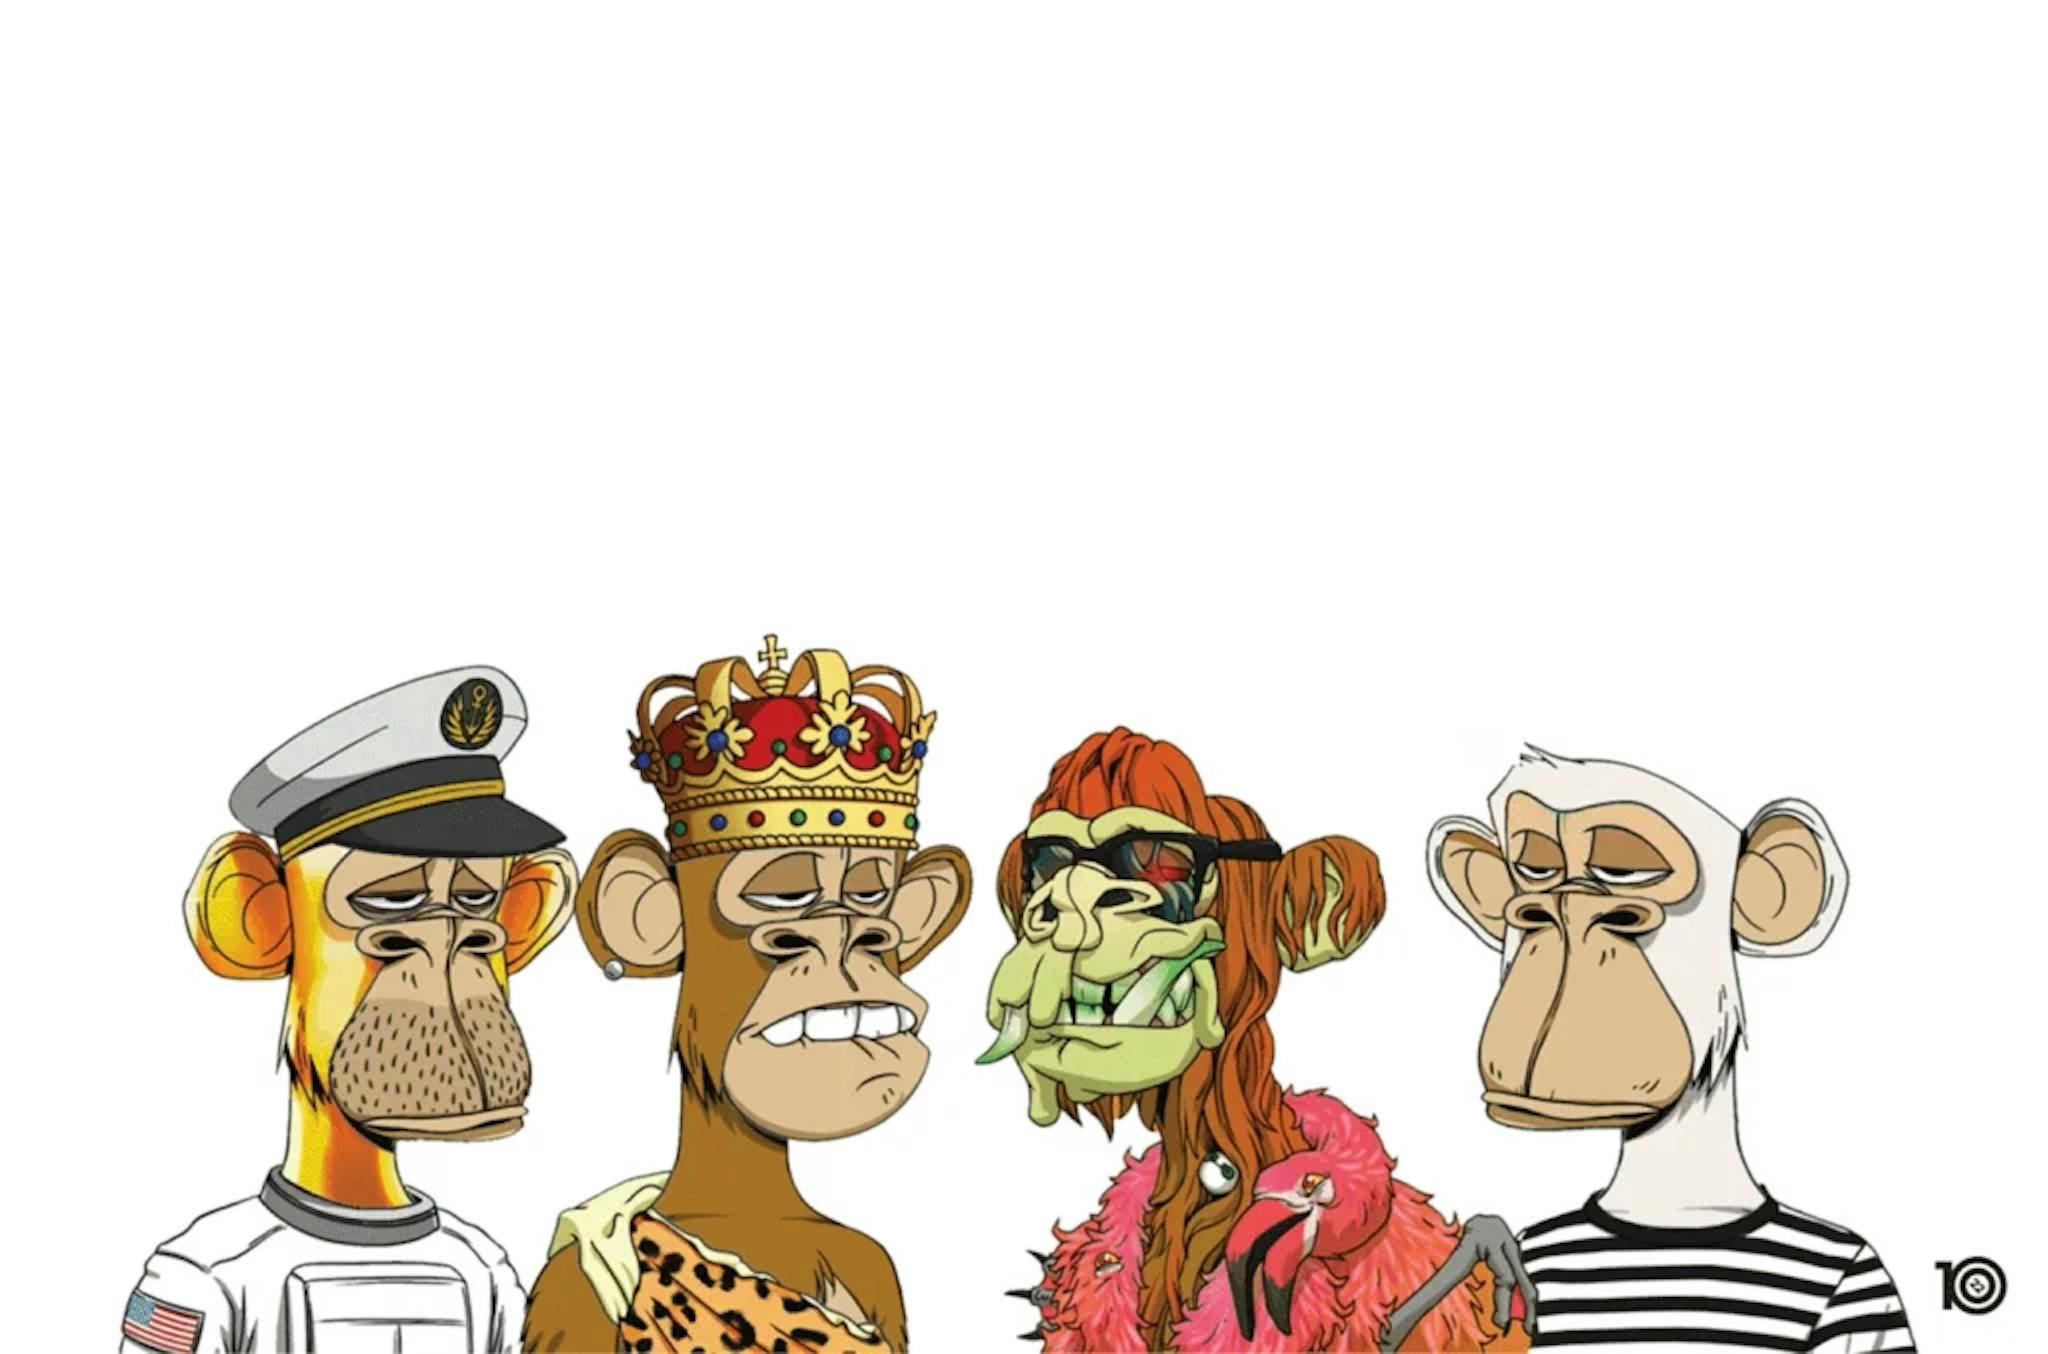 The Apes that Make up the Metaverse Band, Kingship